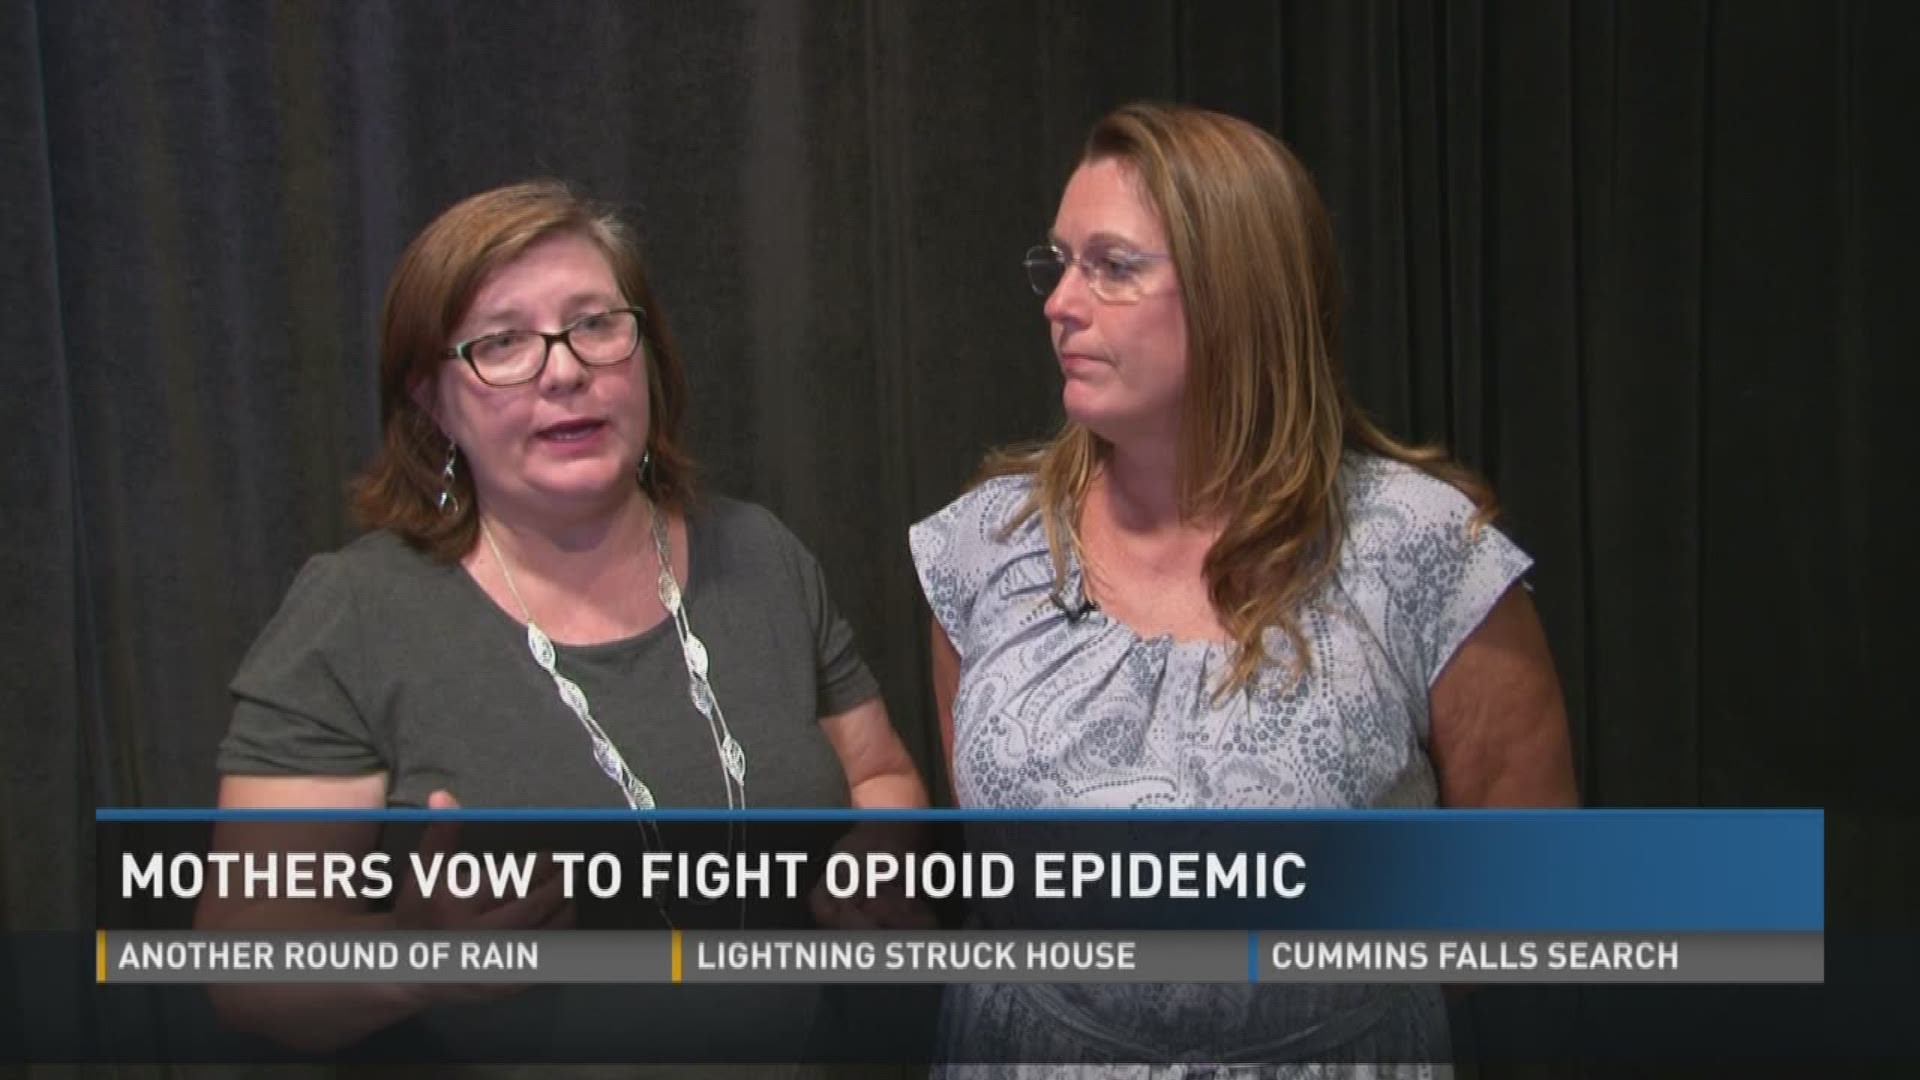 July 6, 2017: Mothers touched by the growing opioid epidemic share their story in the hopes it will help other families.